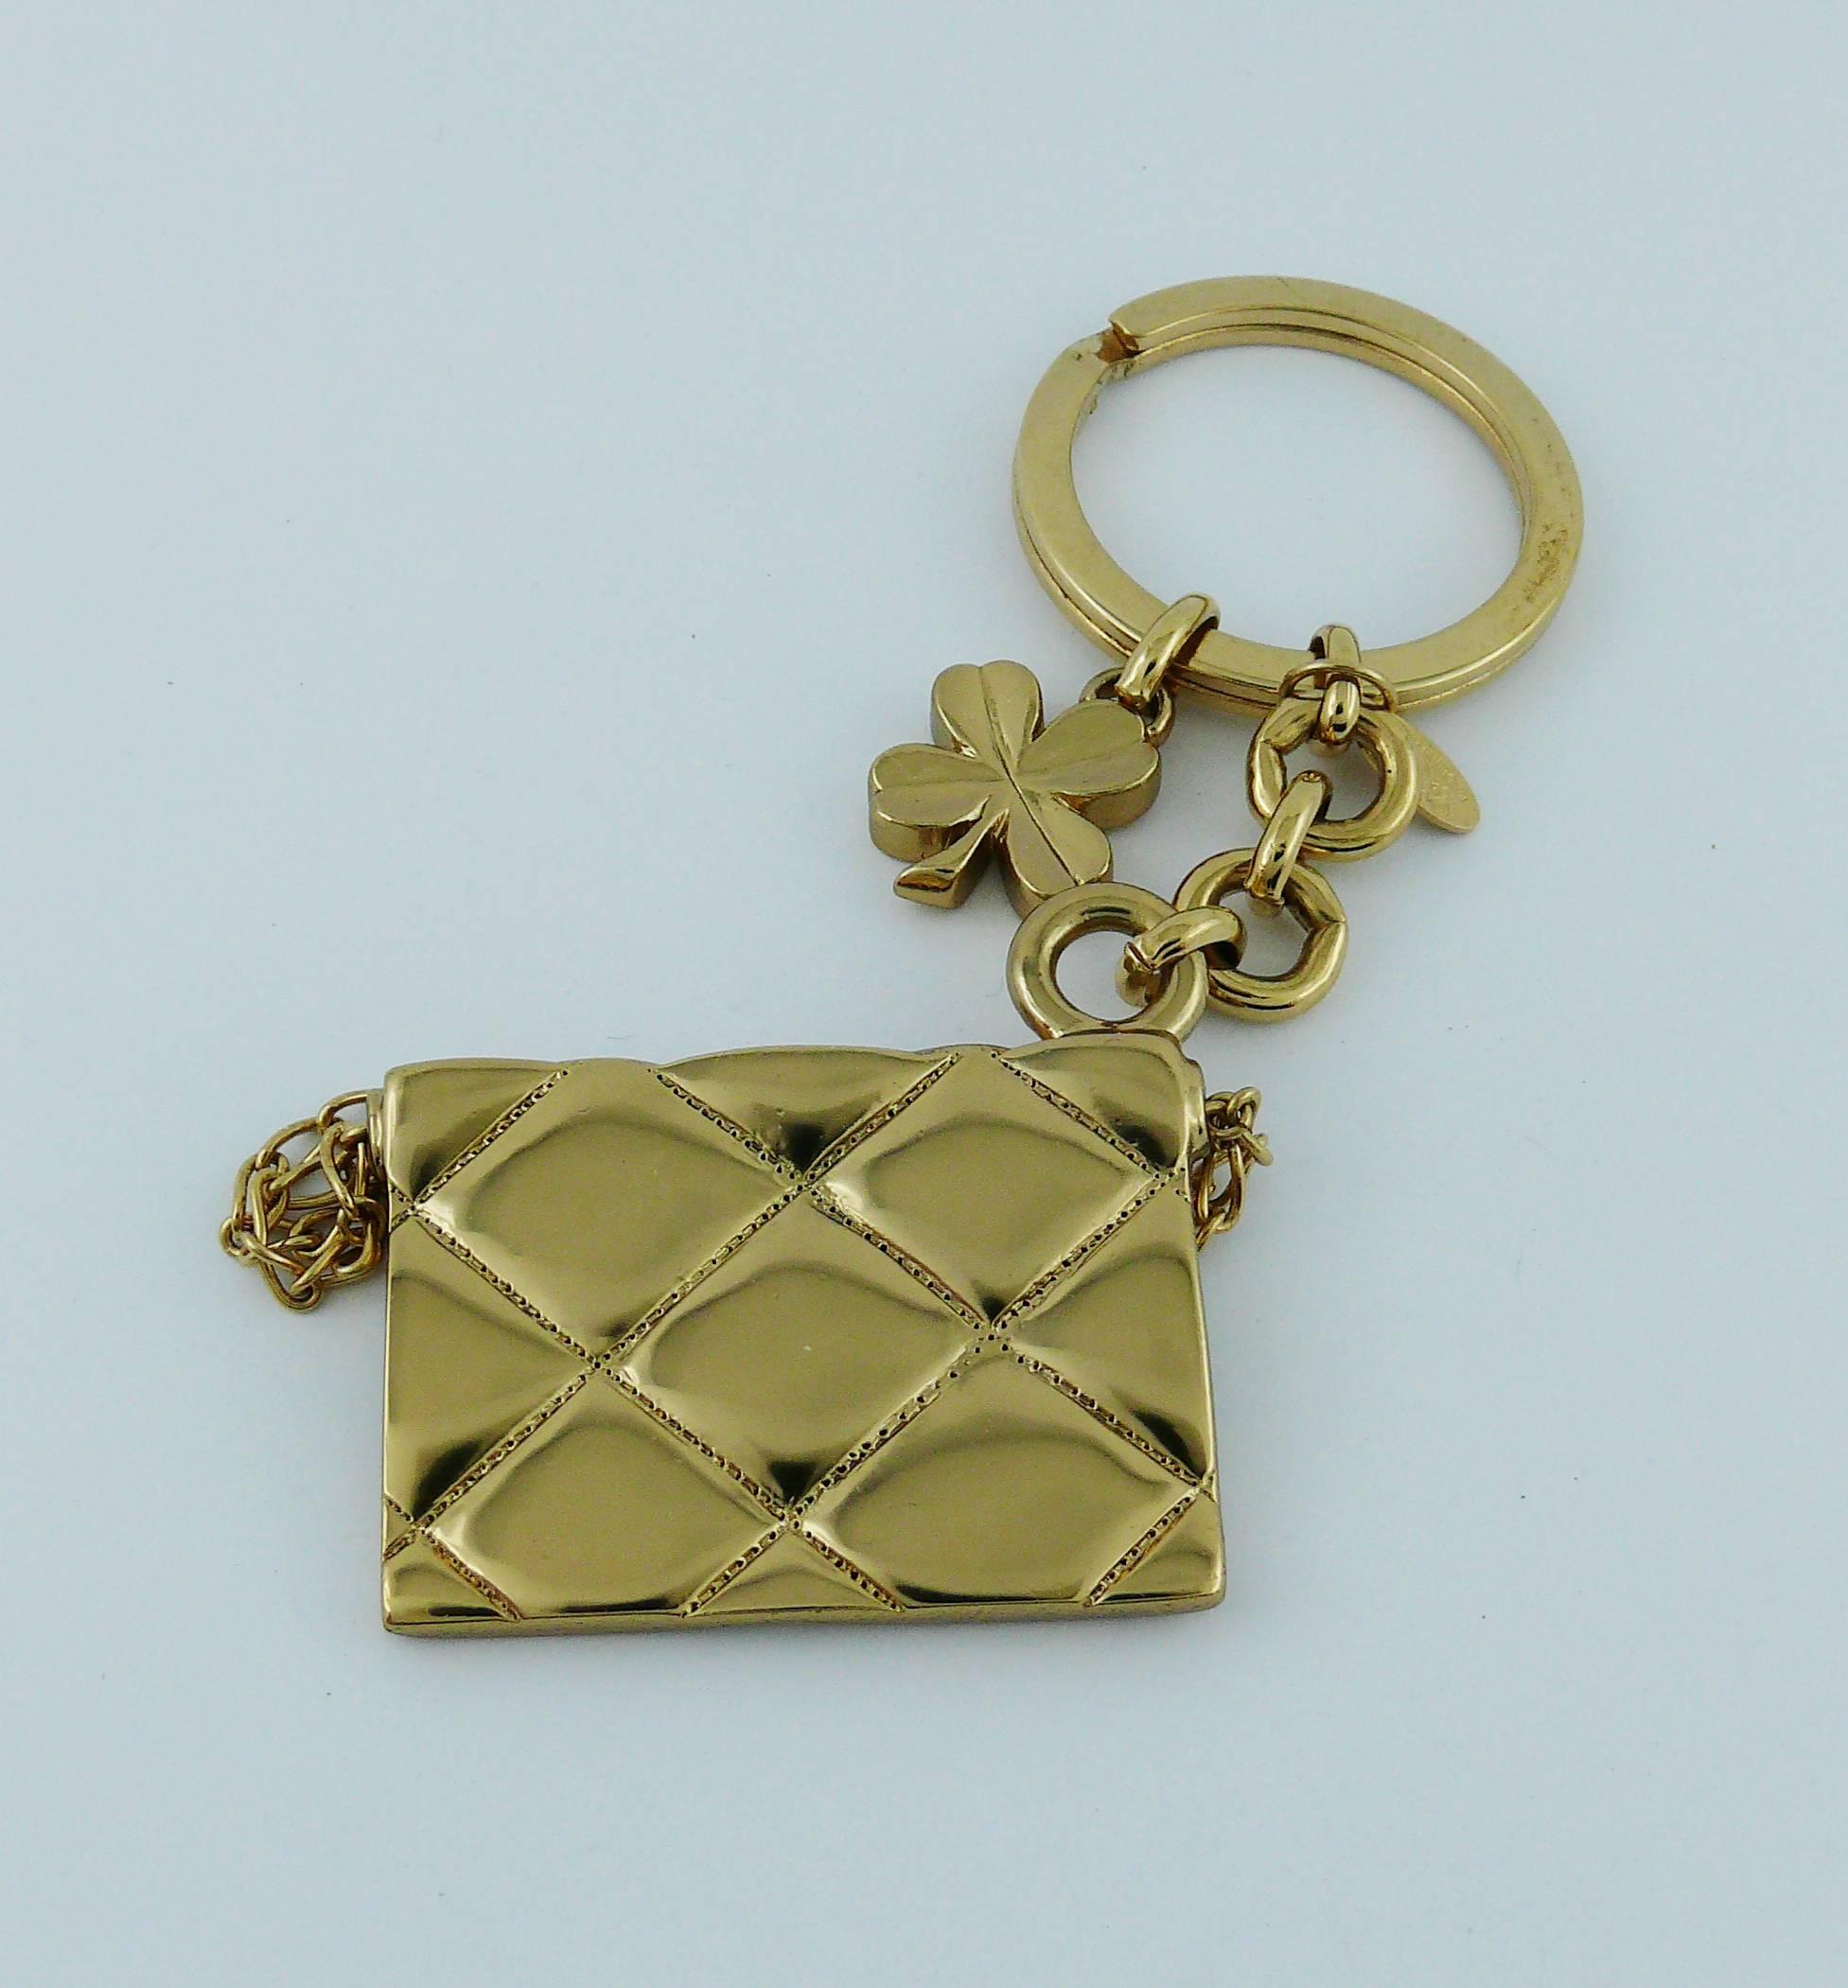 Chanel Spring 2002 Gold Toned Key Ring / Bag Charm 1